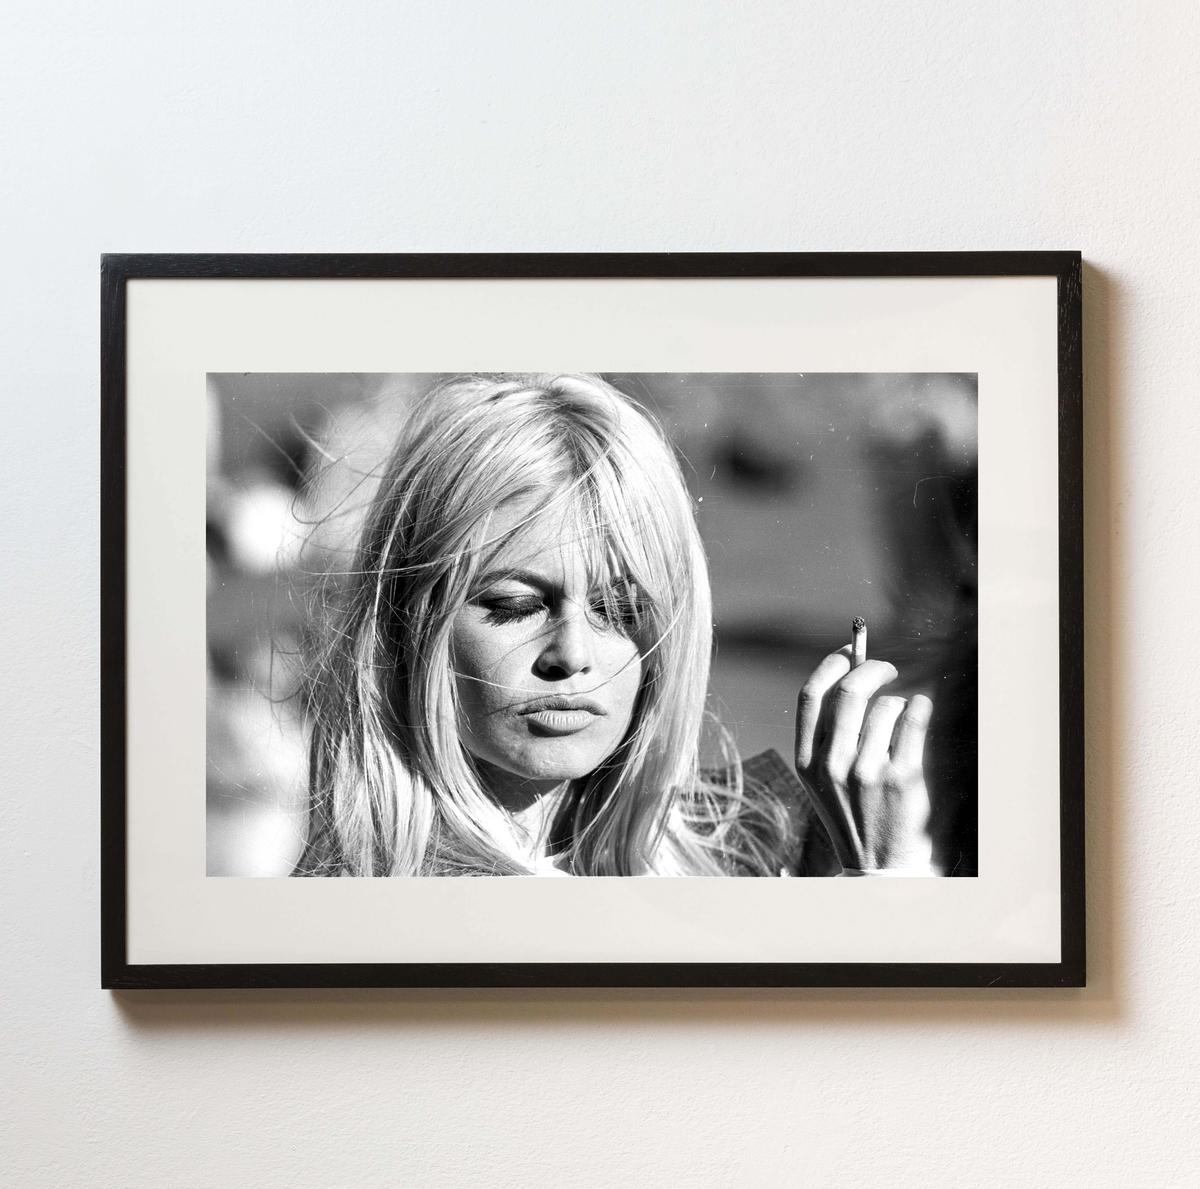 Brigitte Bardot with cigarette in hand by photographer Michael Ochs, originally taken in 1962. (Michael Ochs Archives/Getty Images)

As an authorized Getty Images Gallery partner, we offer premium quality prints scanned from the original negatives